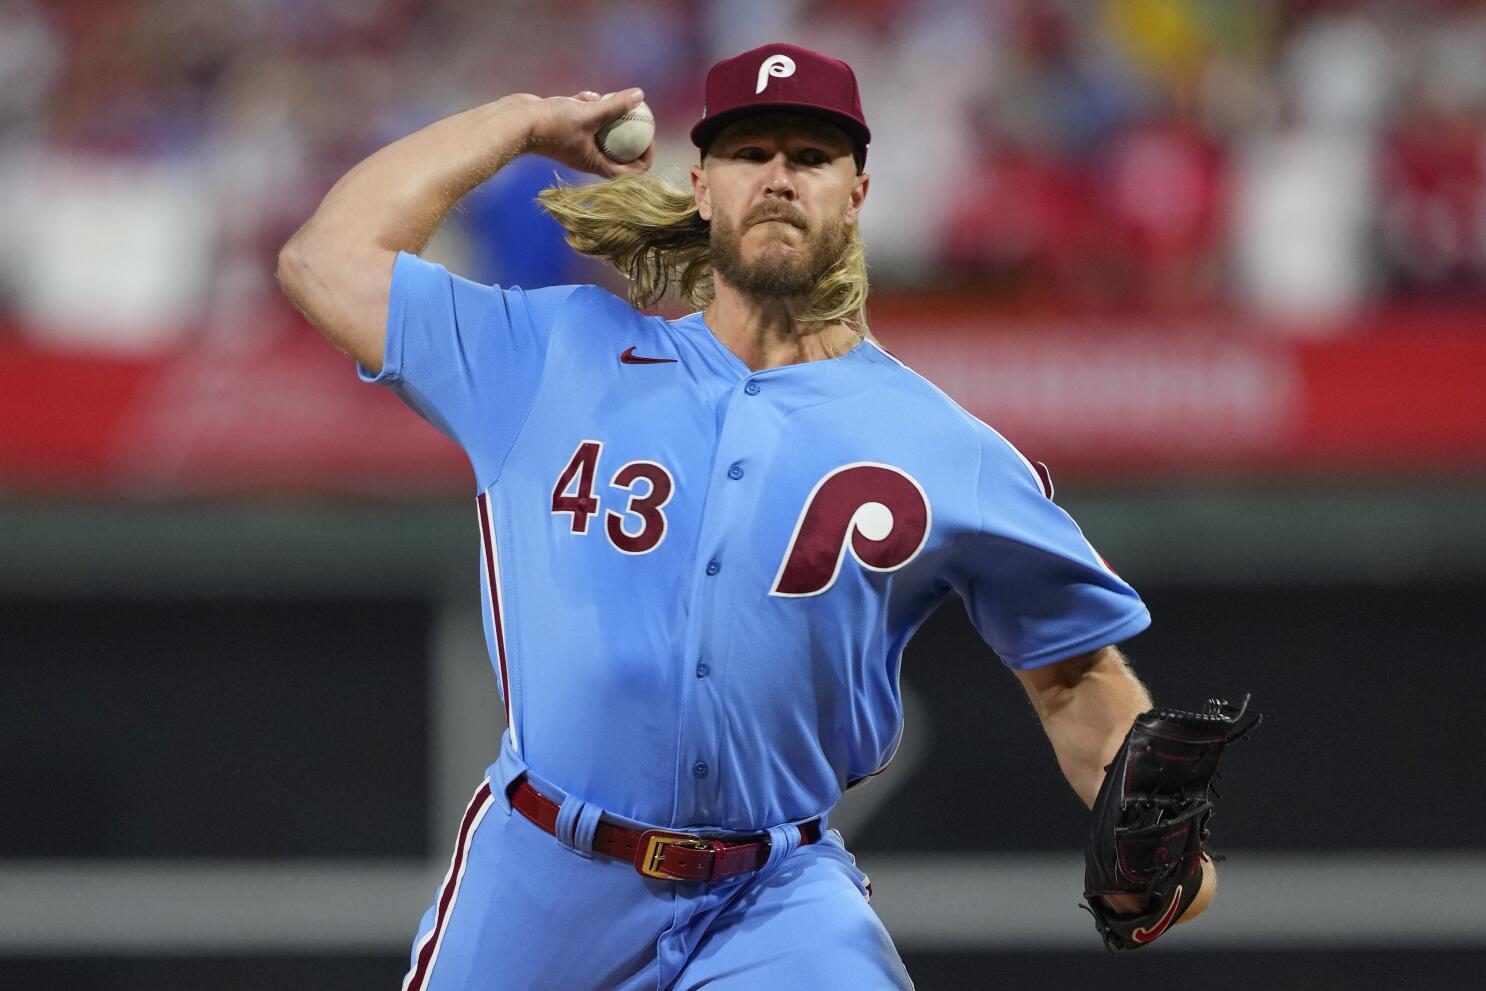 Report: Phillies make their move, agree to five-year deal with